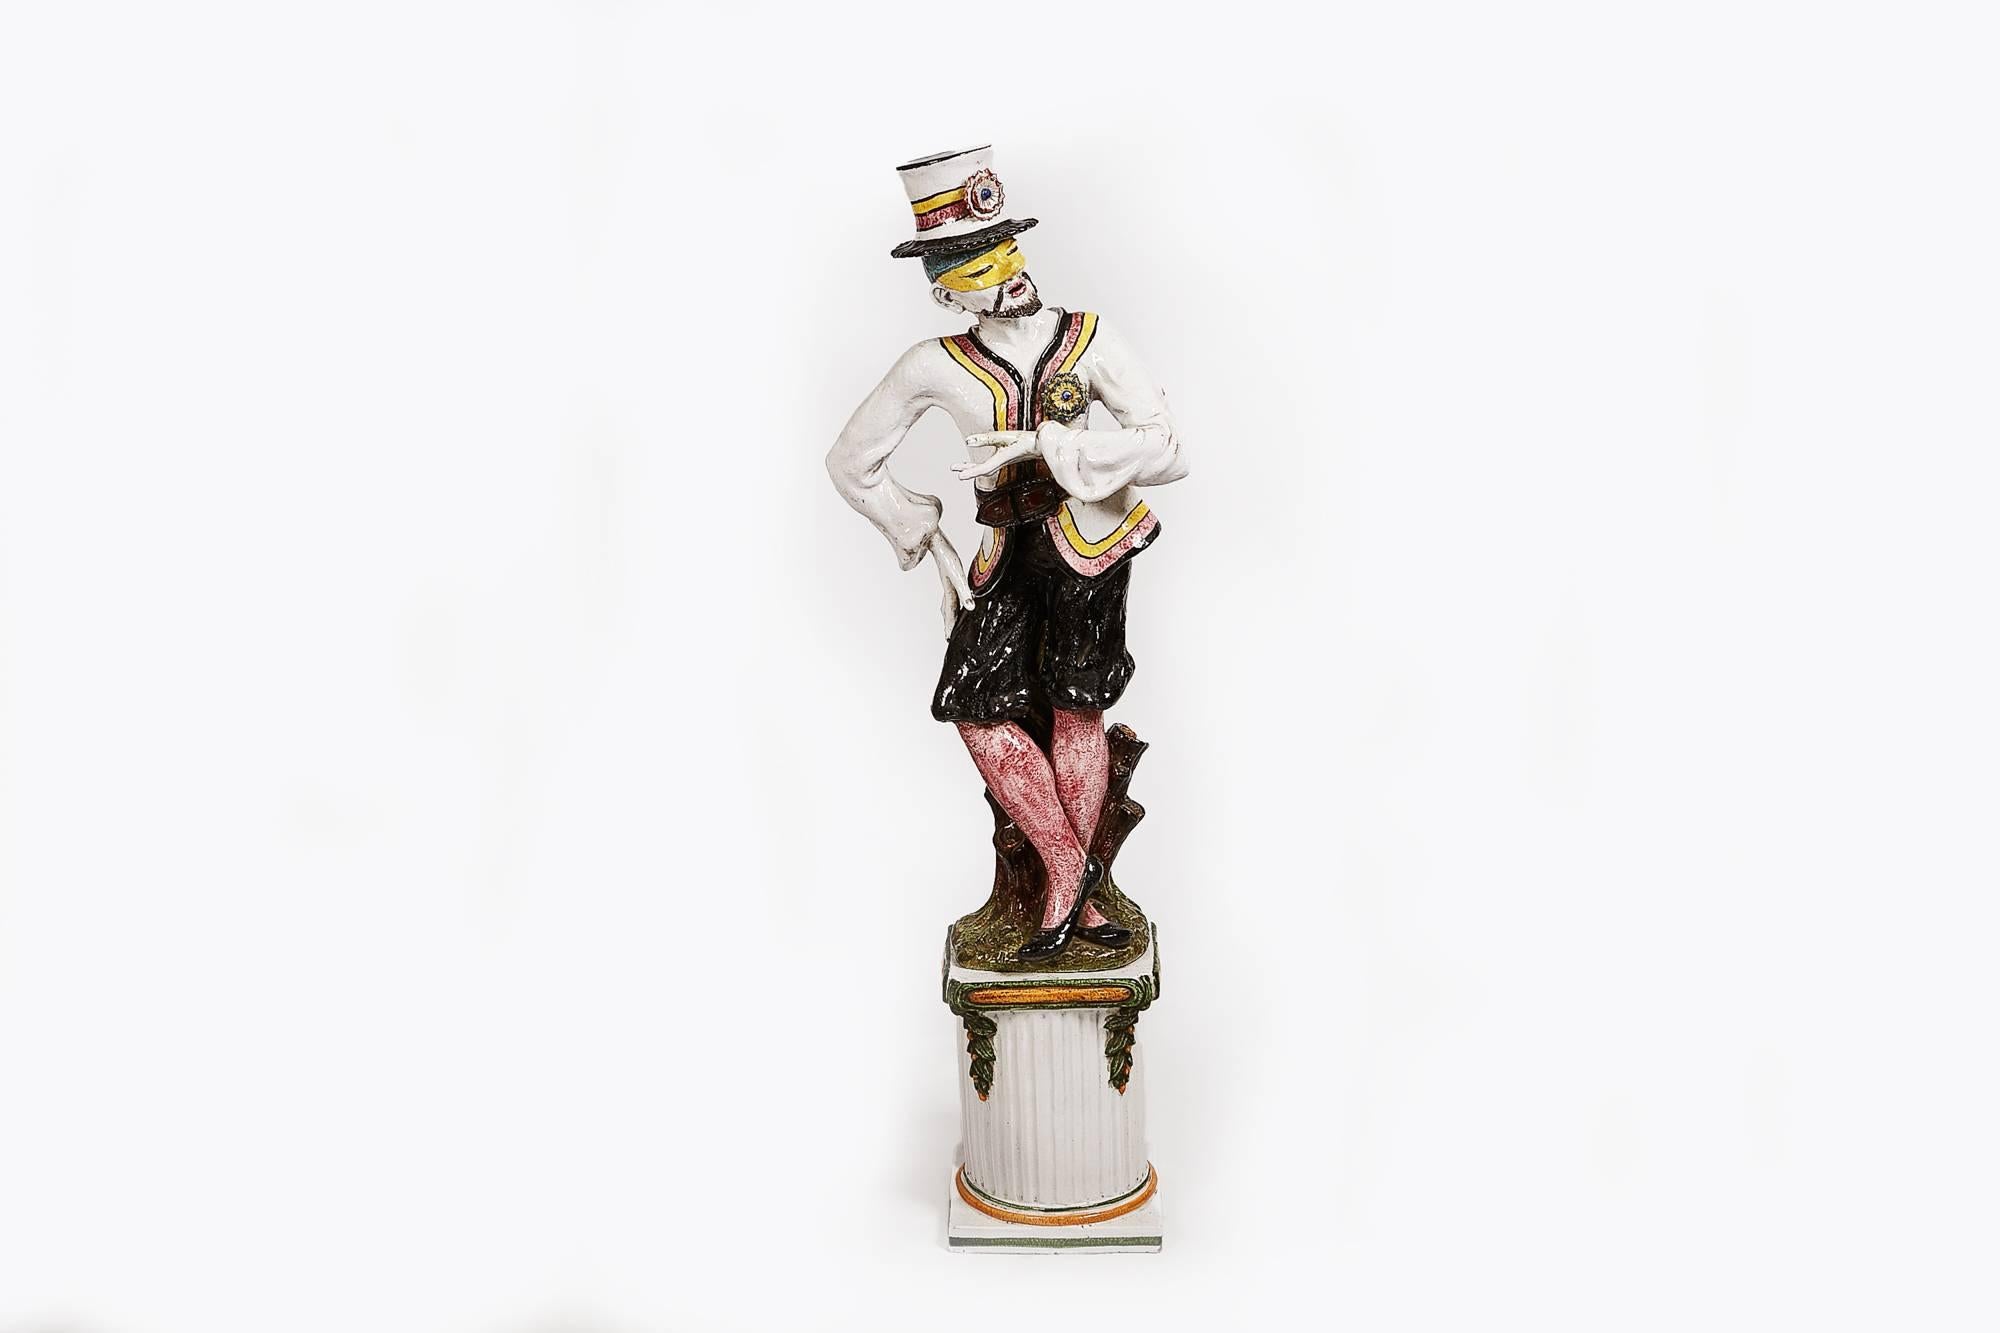 19th century pair of large ceramic painted statues on plinths, dressed as harlequins in a carnival style. One male and one female.